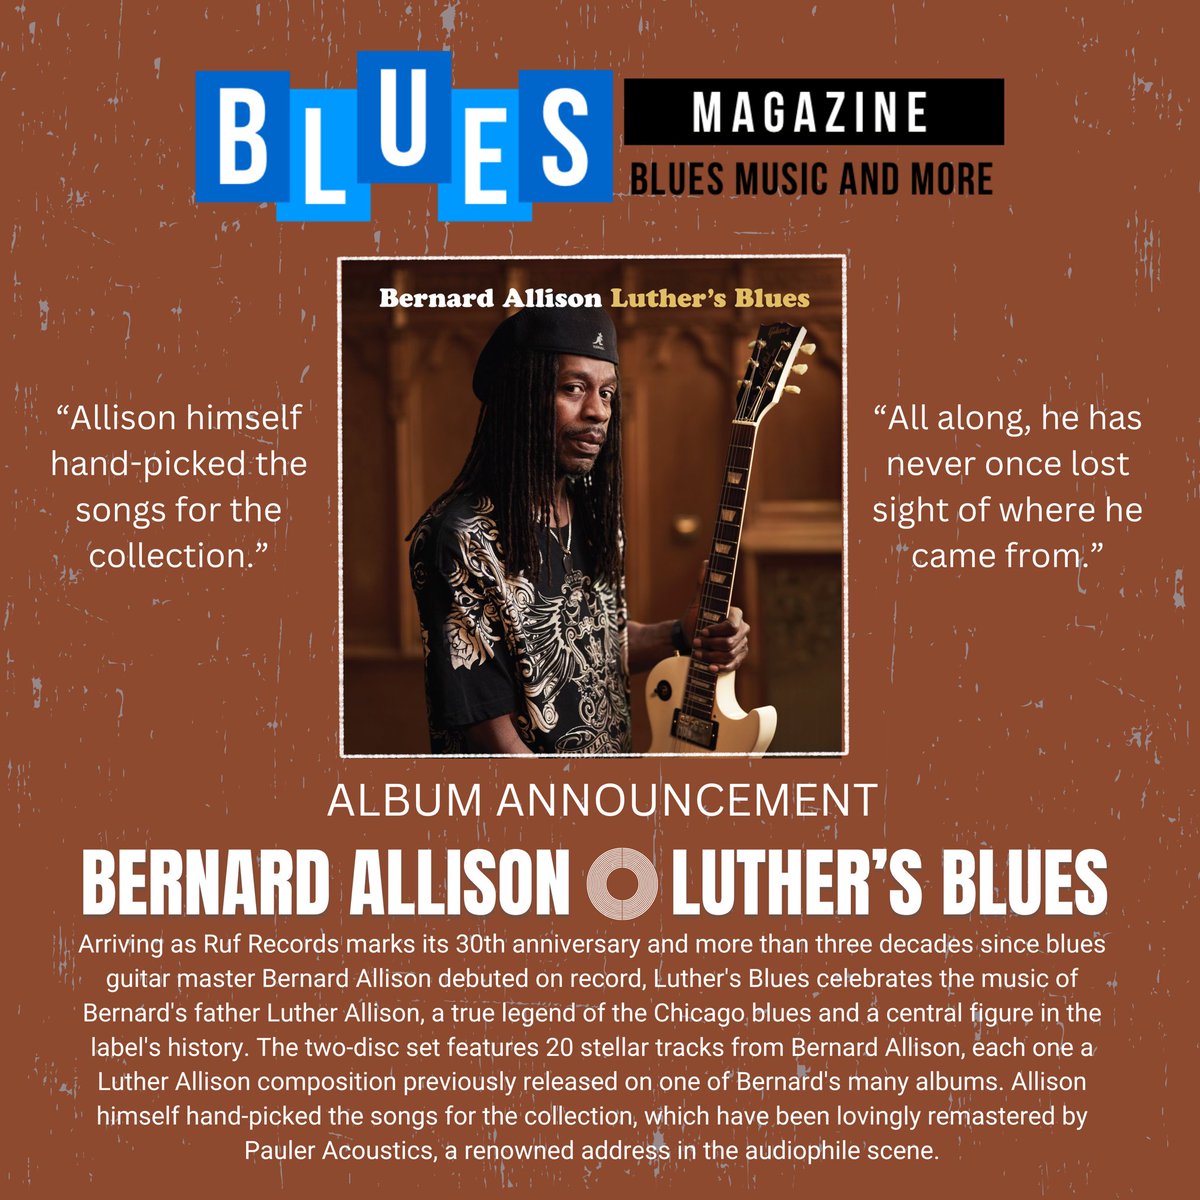 “All along, he has never once lost sight of where he came from” BluesMagazine the new album BERNARD ALLISON LUTHER’S BLUES! ➡️ bluesmagazine.nl/bernard-alliso… 🔥𝐏𝐑𝐄 𝐒𝐀𝐕𝐄 𝐘𝐎𝐔𝐑 𝐂𝐎𝐏𝐘: orcd.co/wal73mx @BAmusicALLISON @BluesBrat